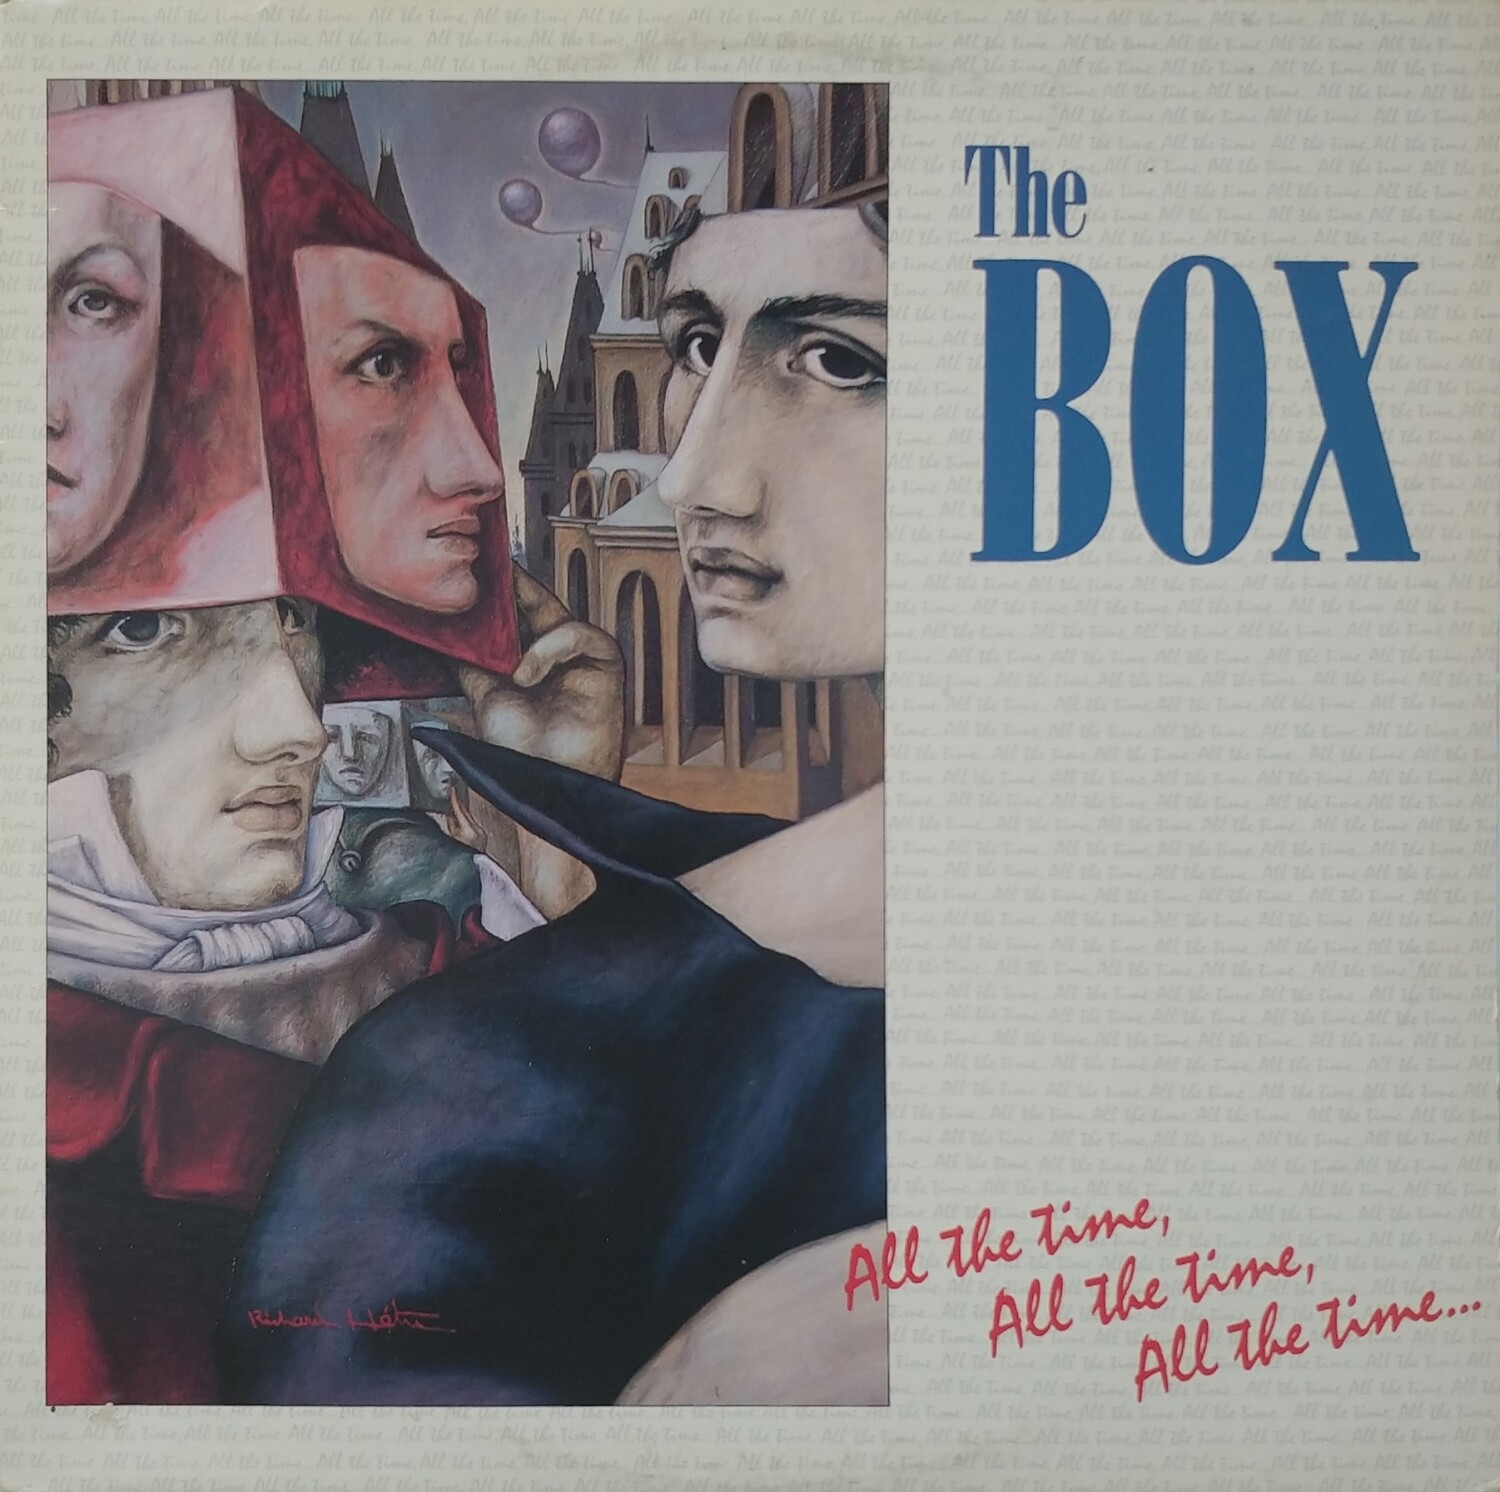 The Box - All the time